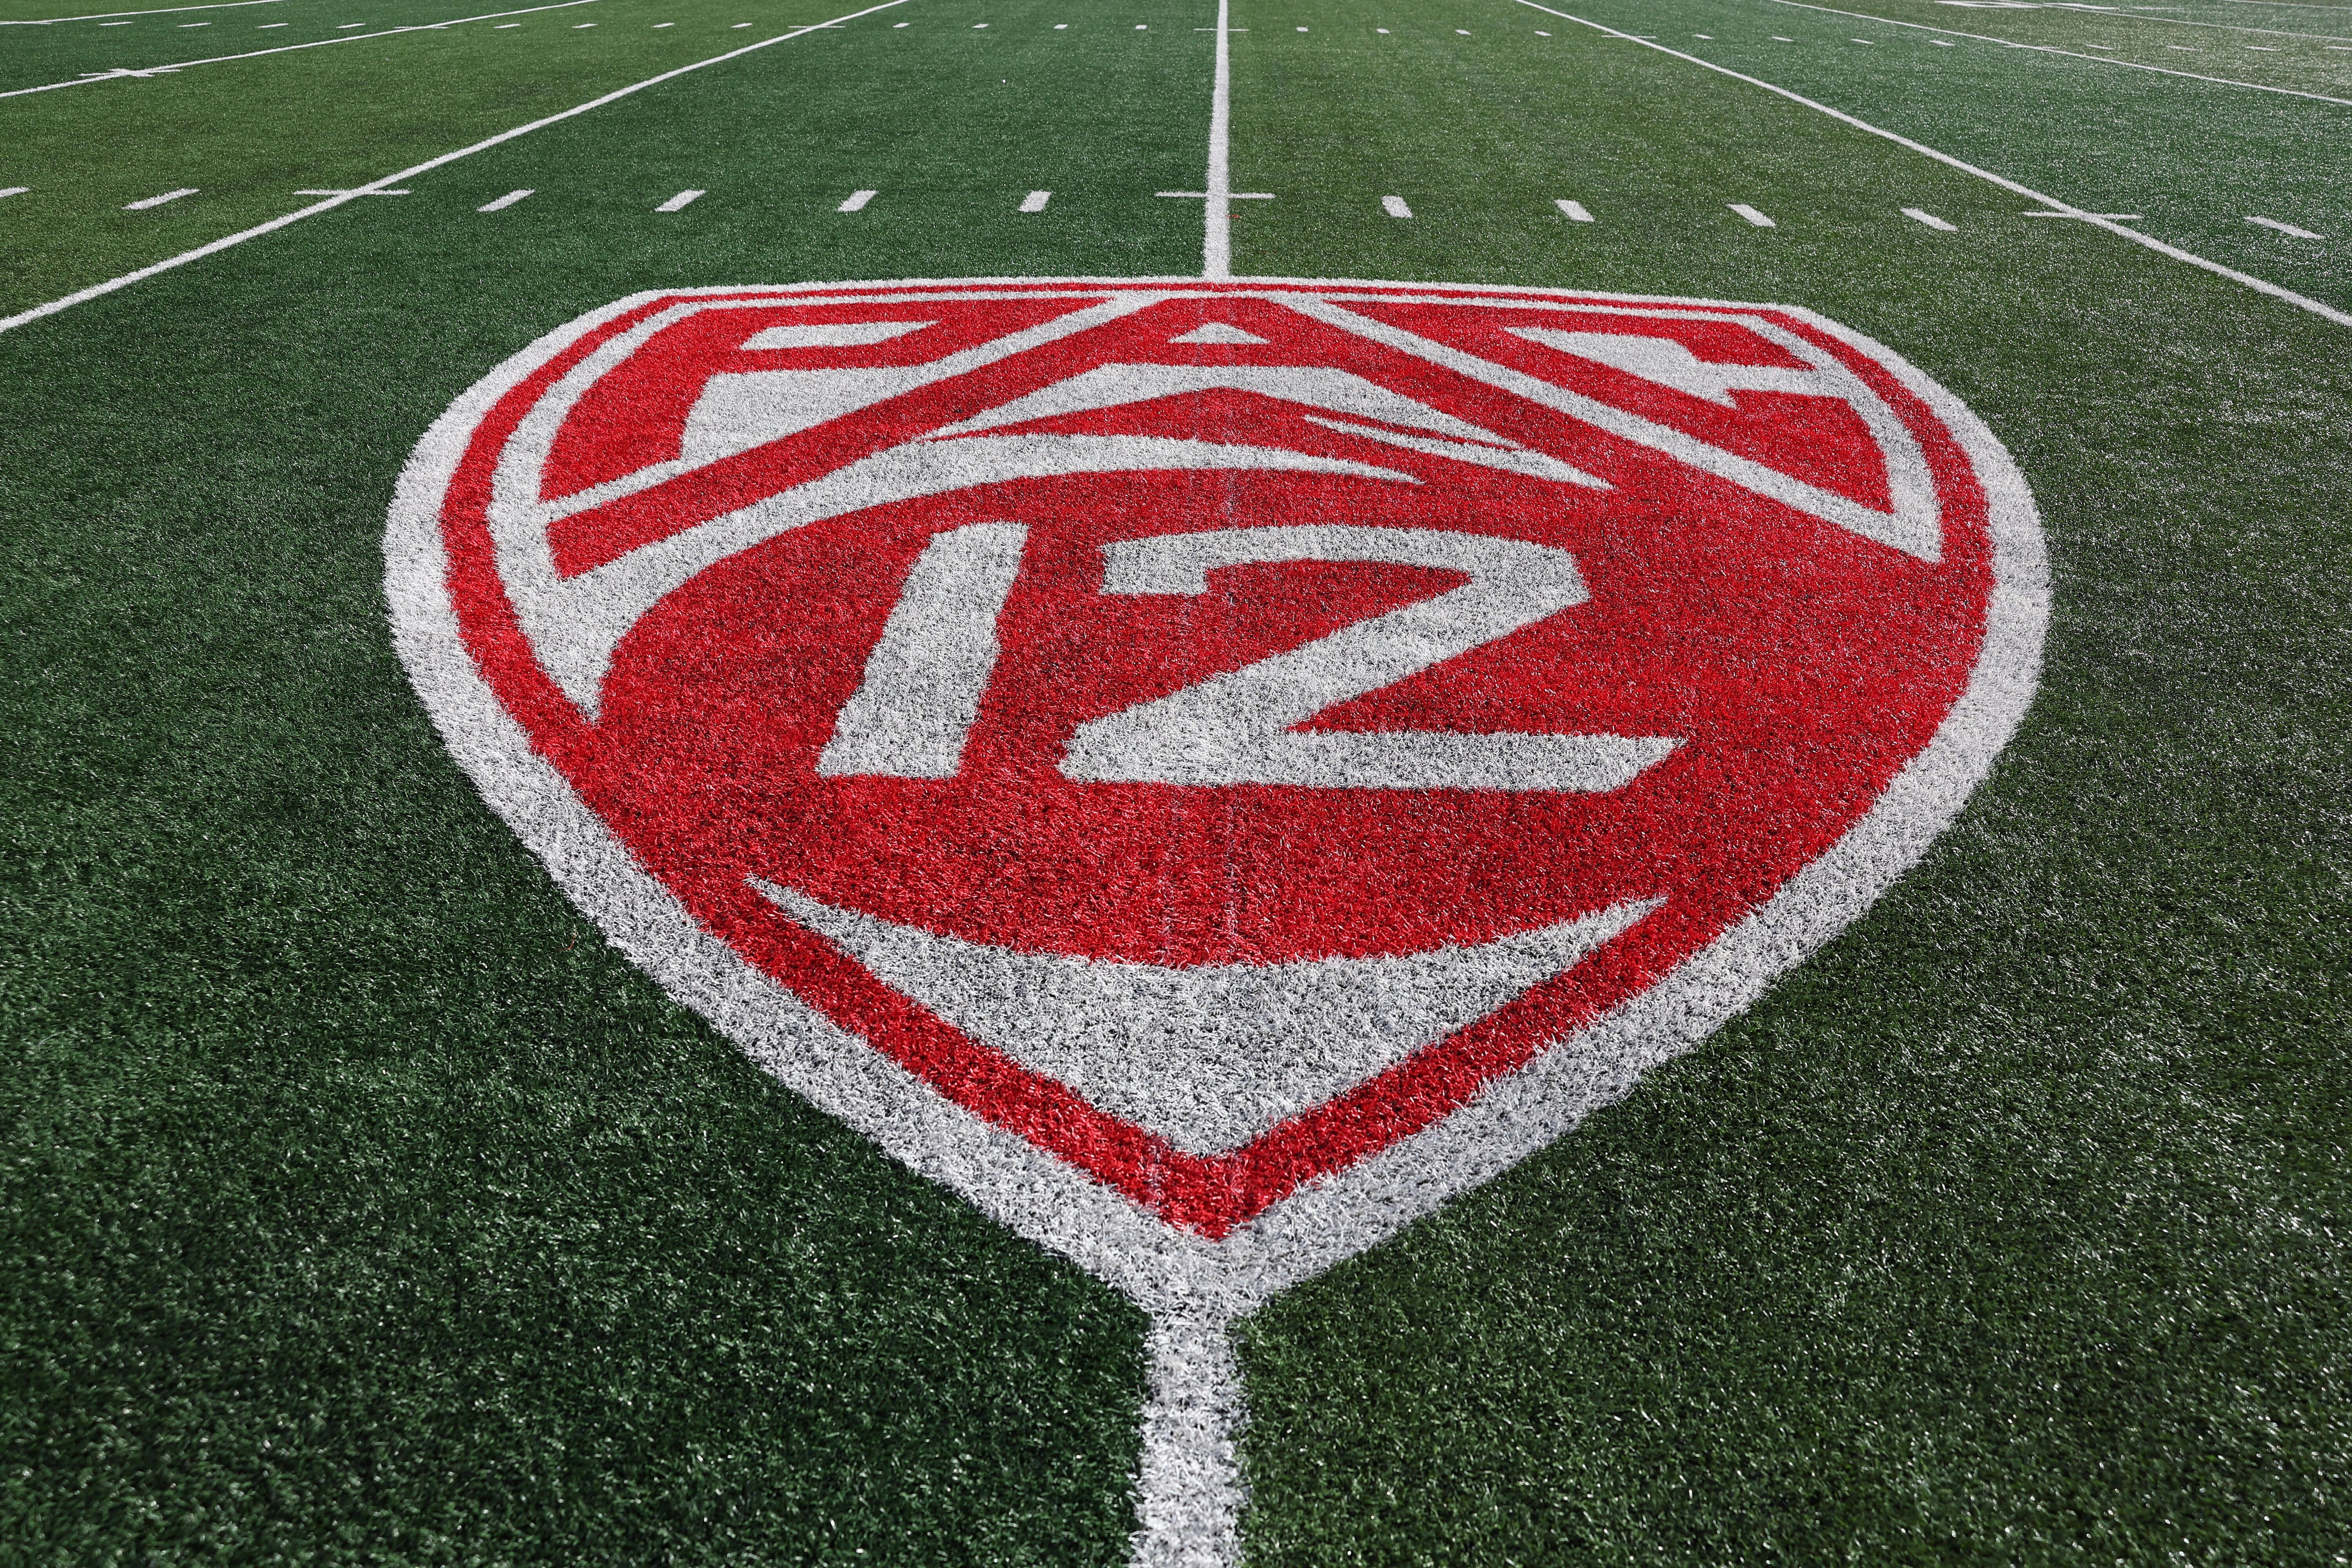 (Rob Gray | AP) A general view of of the Pac-12 logo at Rice Eccles Stadium before an NCAA college football game between Utah and Colorado, Saturday, Nov. 25, 2023, in Salt Lake City.